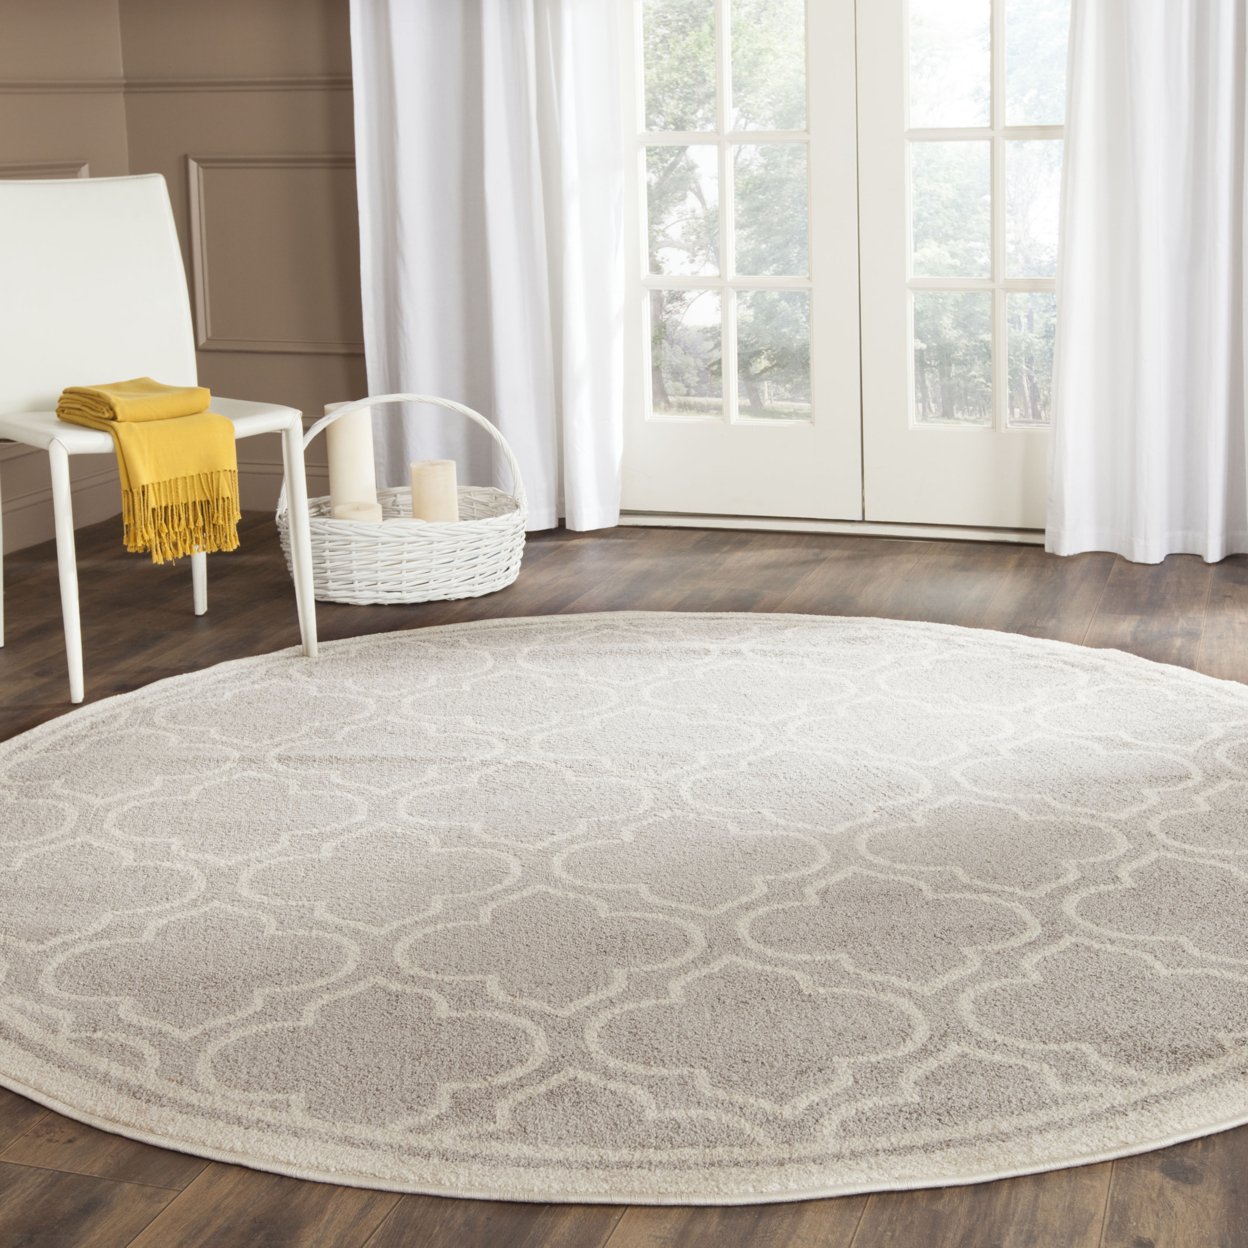 SAFAVIEH Amherst Collection AMT412B Light Grey/Ivory Rug - 9' Square